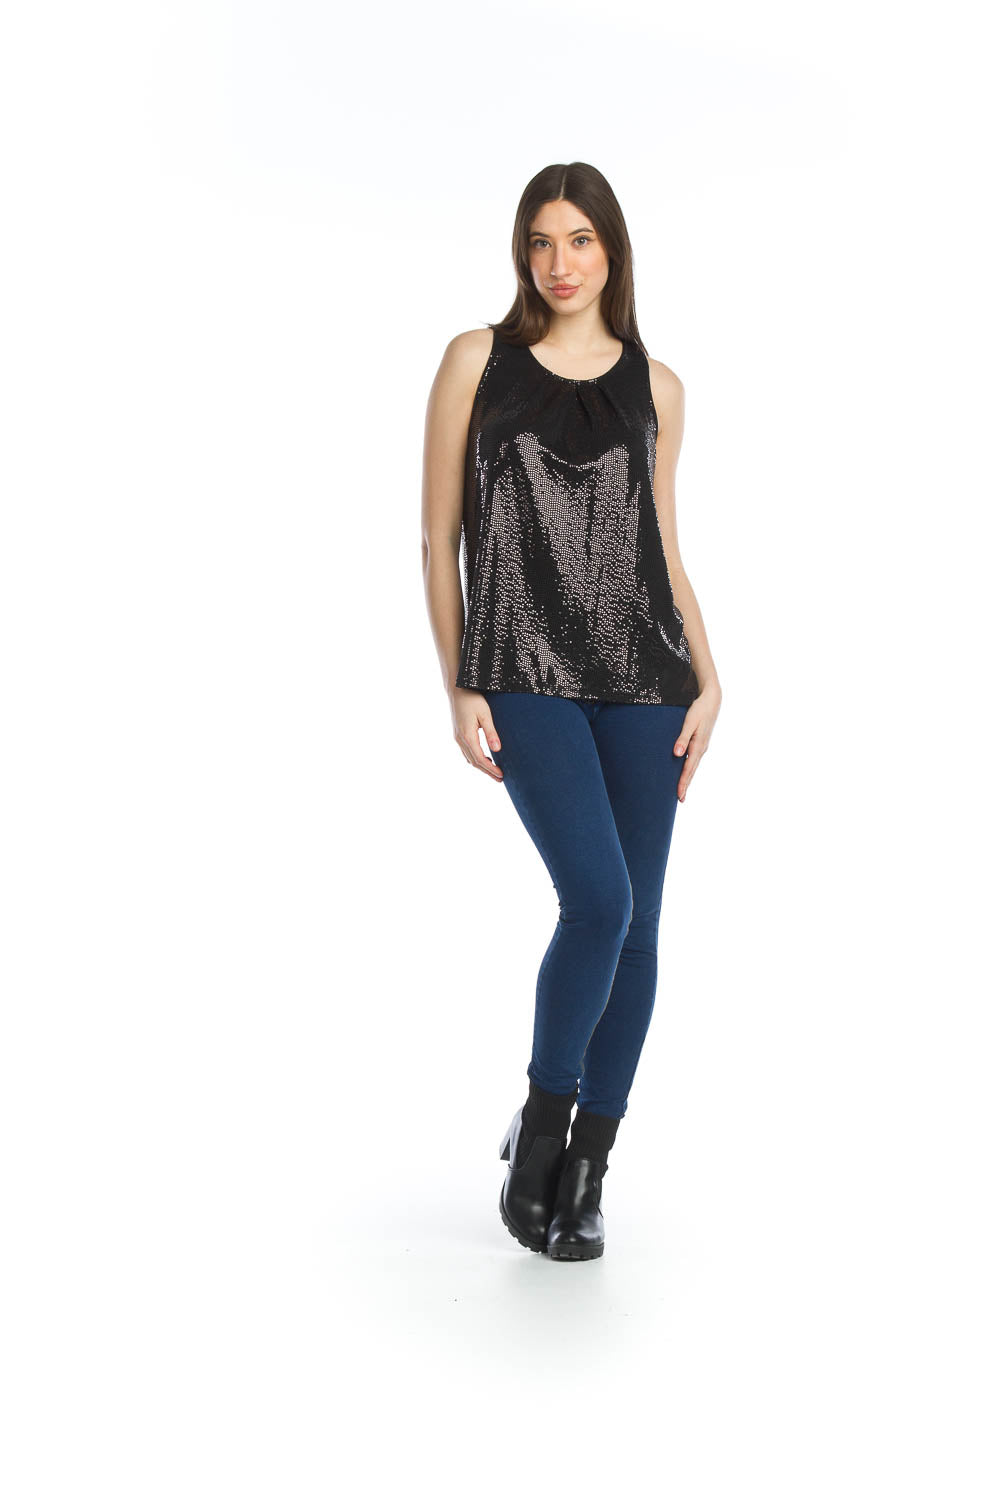 Papi Black Sequin Pleated Stretch Top